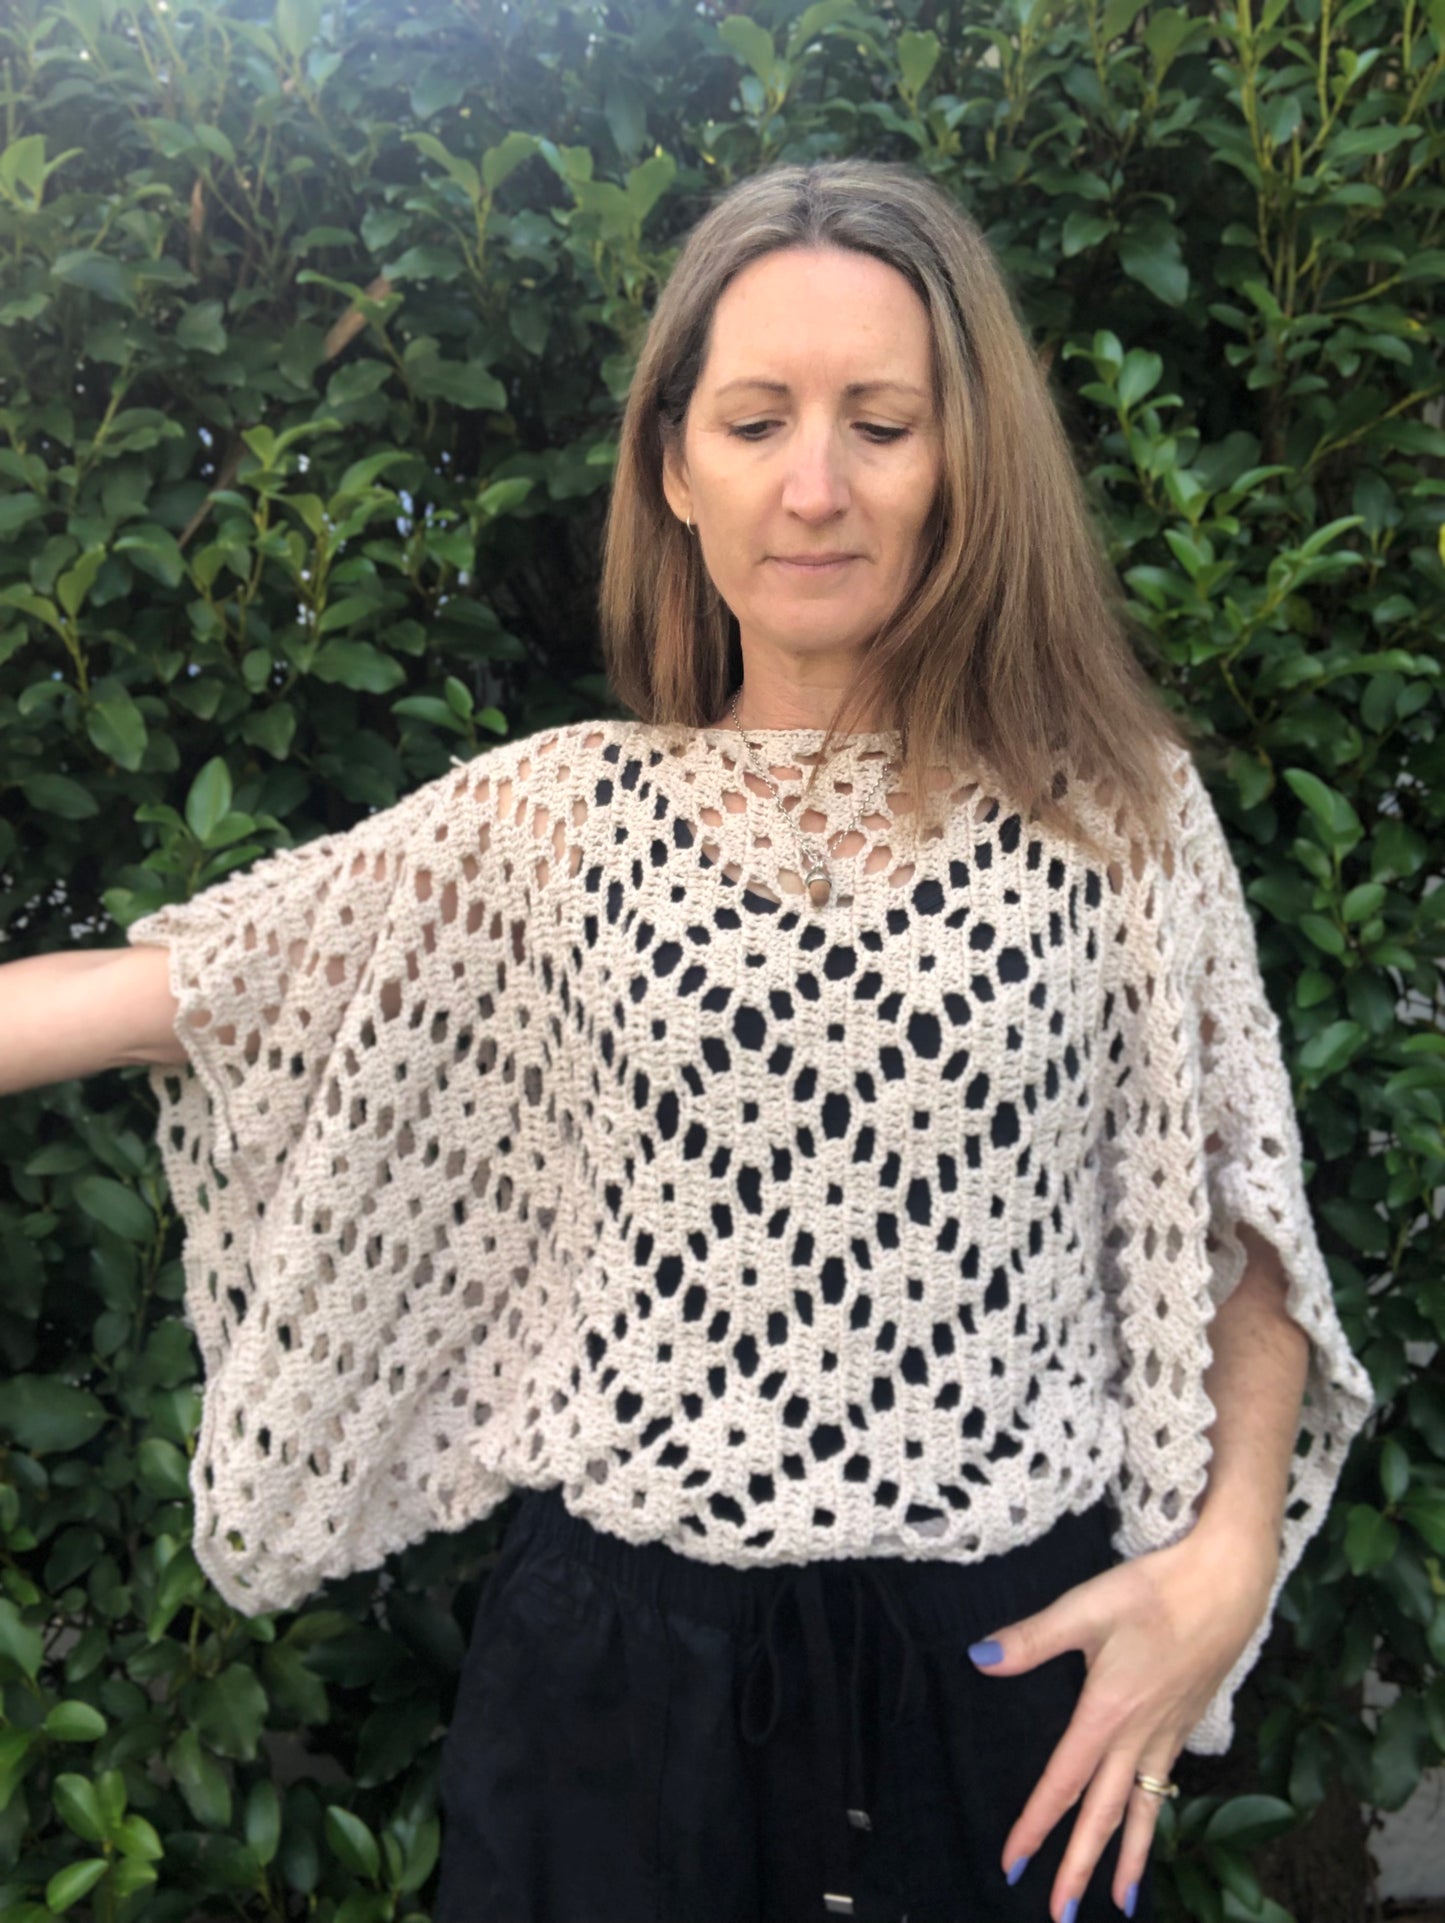 Learn to make crochet clothing - Tuesday 11th June 2pm